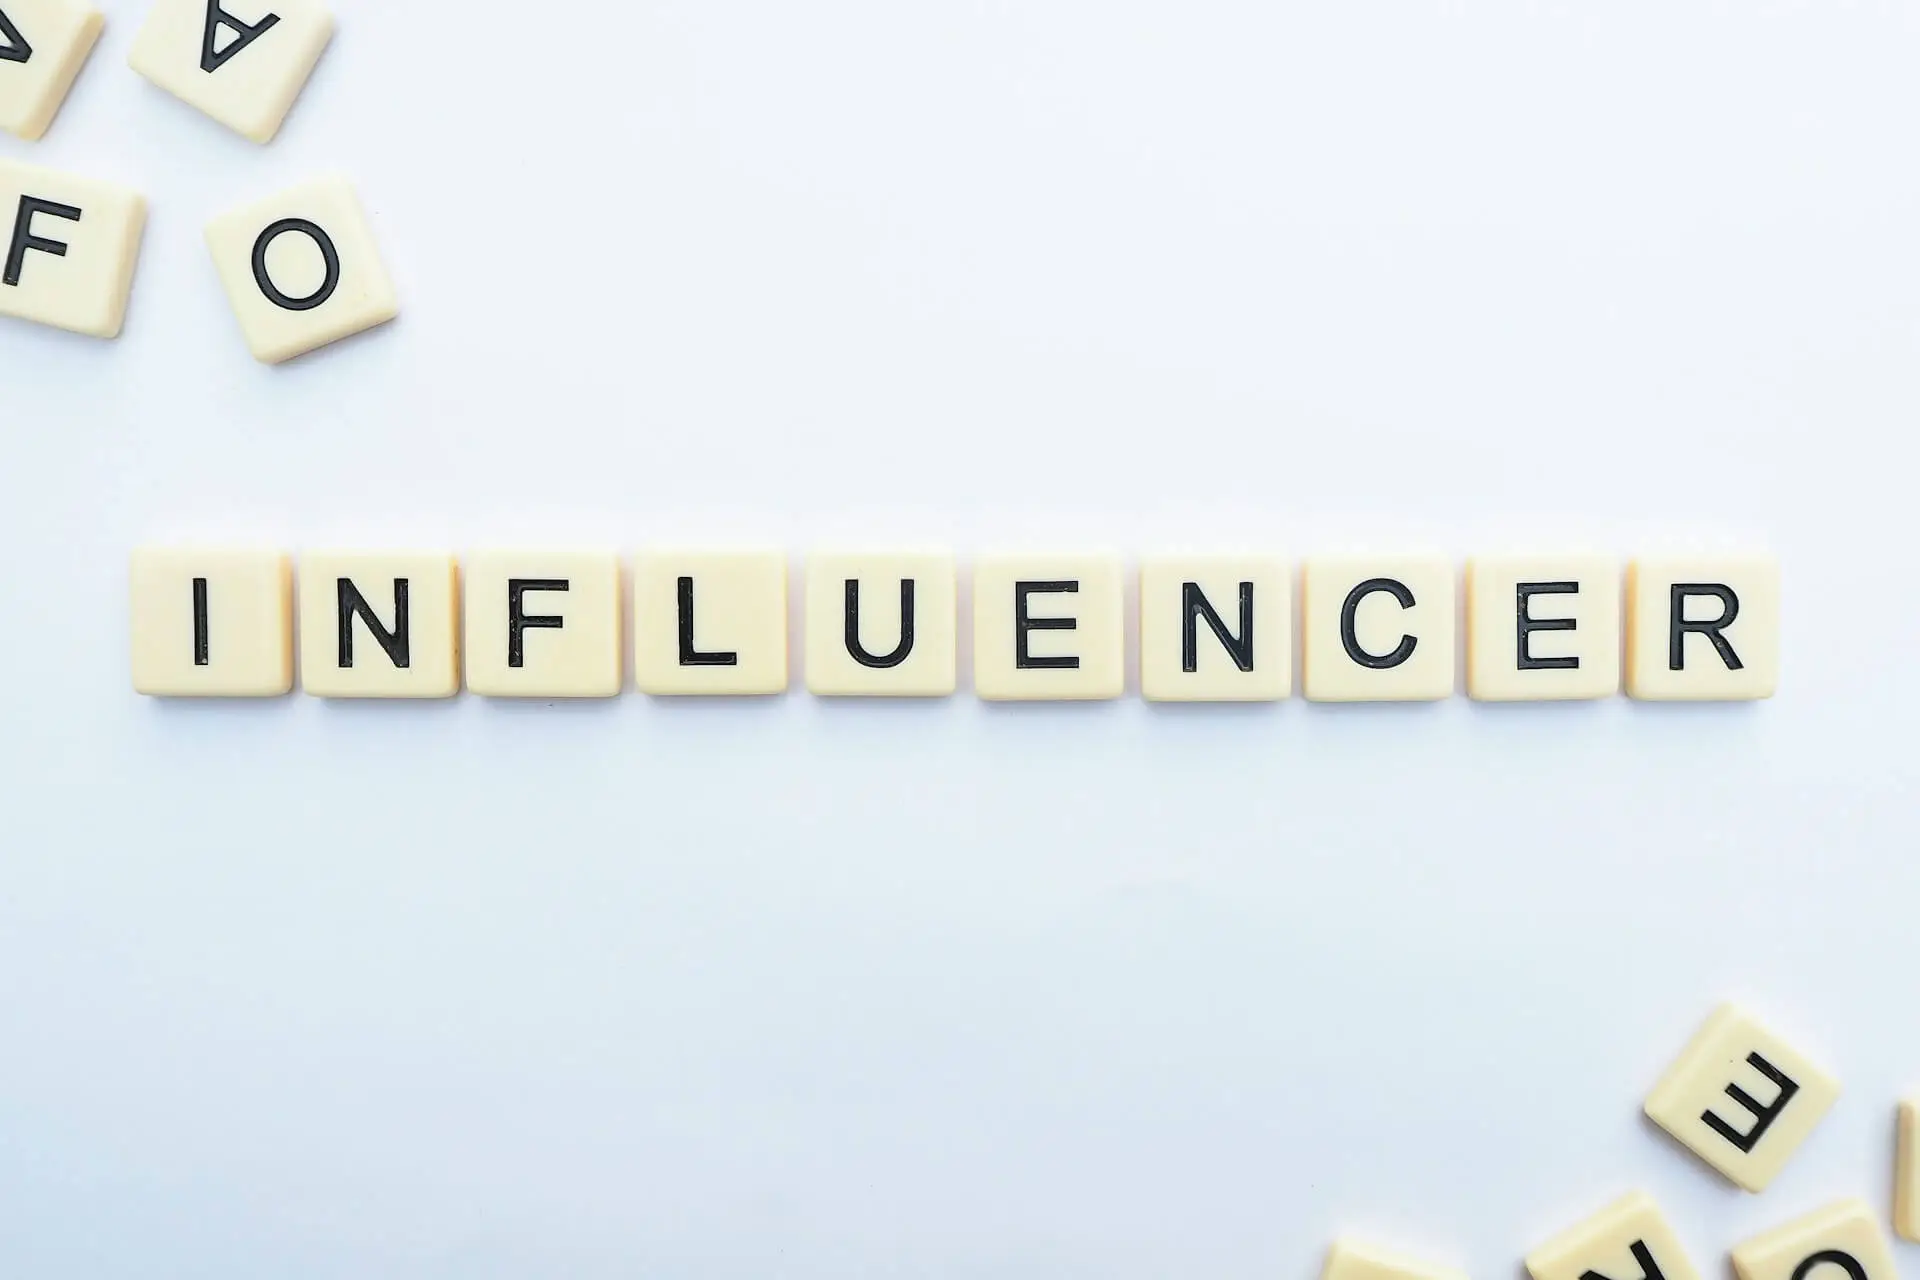 Letters of influencer on ground used to show the importance of authentic influencer marketing.